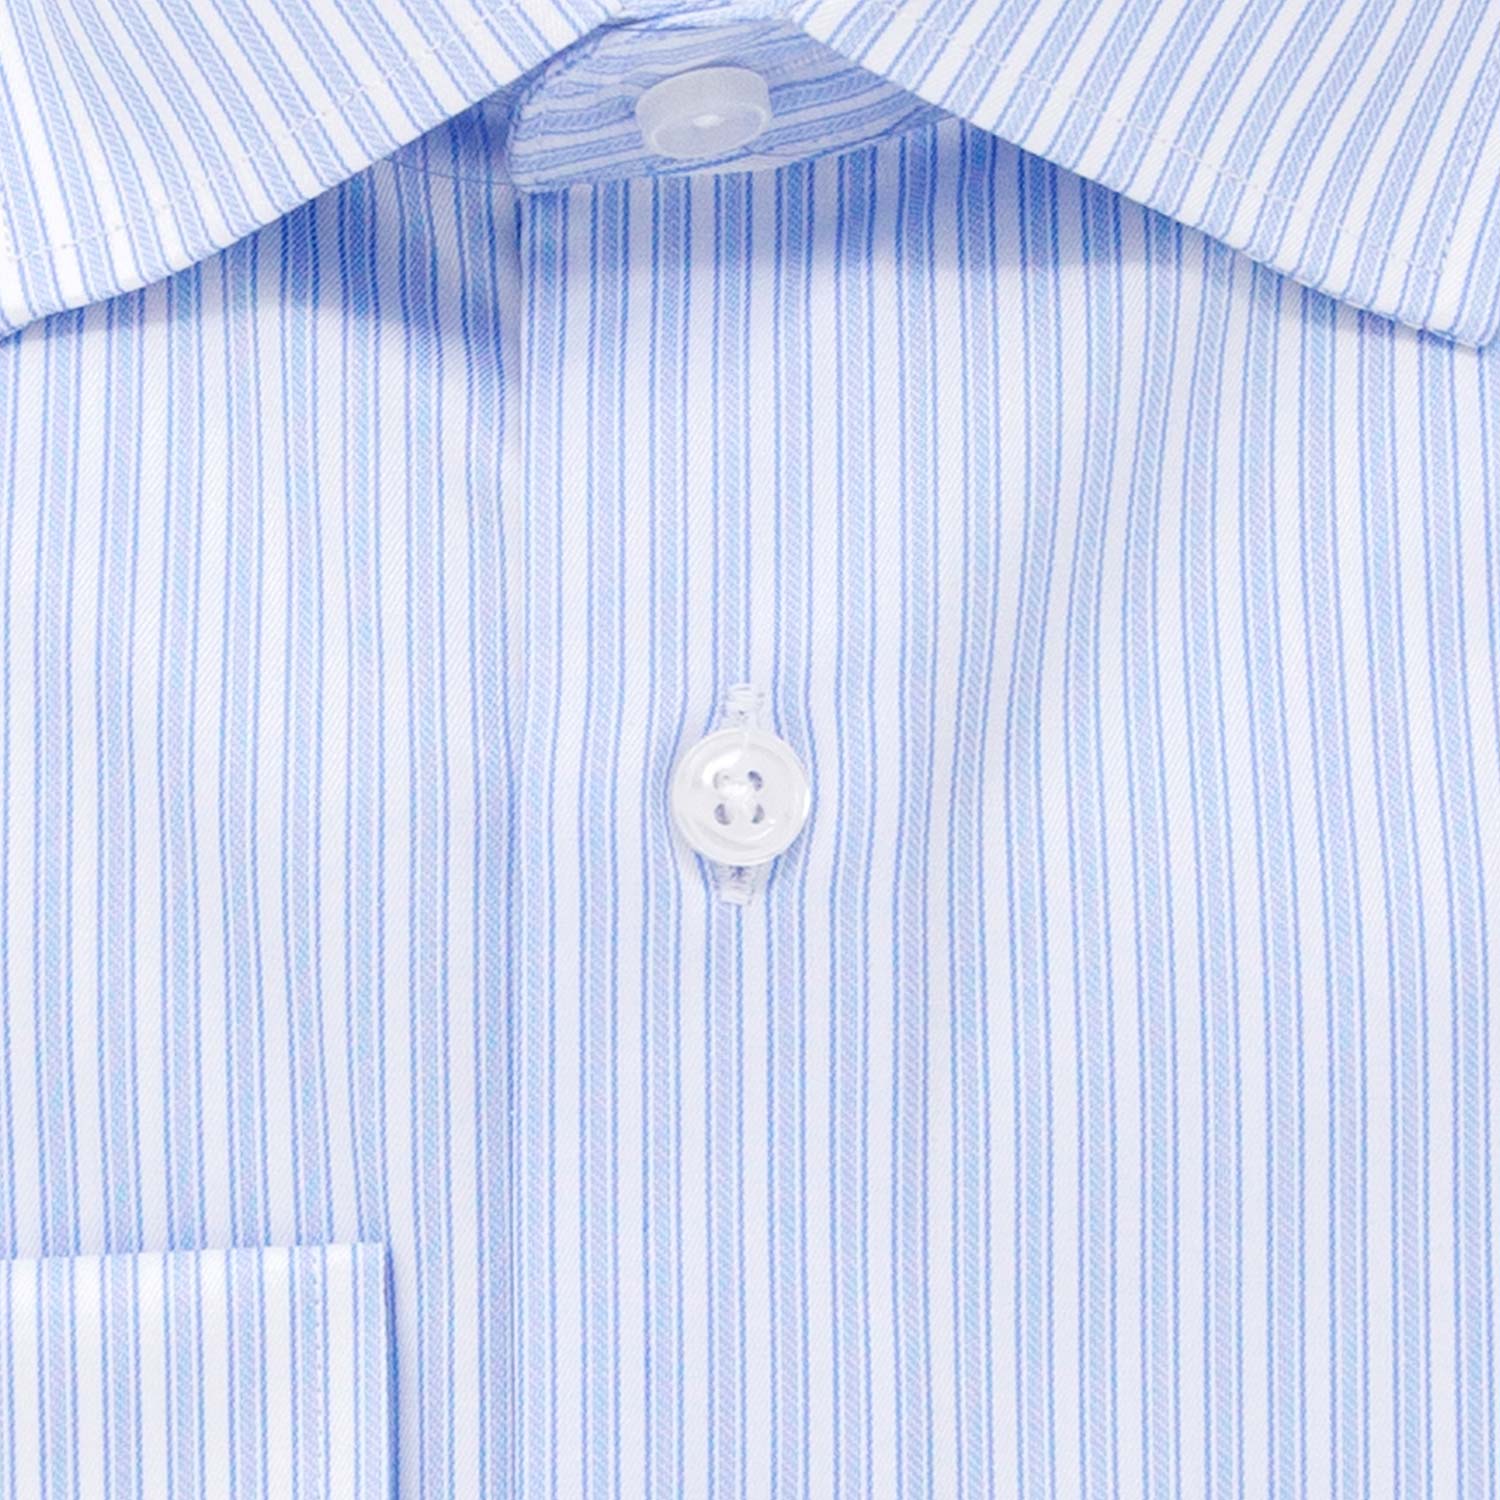 mens blue and white striped dress shirt close up showing button and fabric details